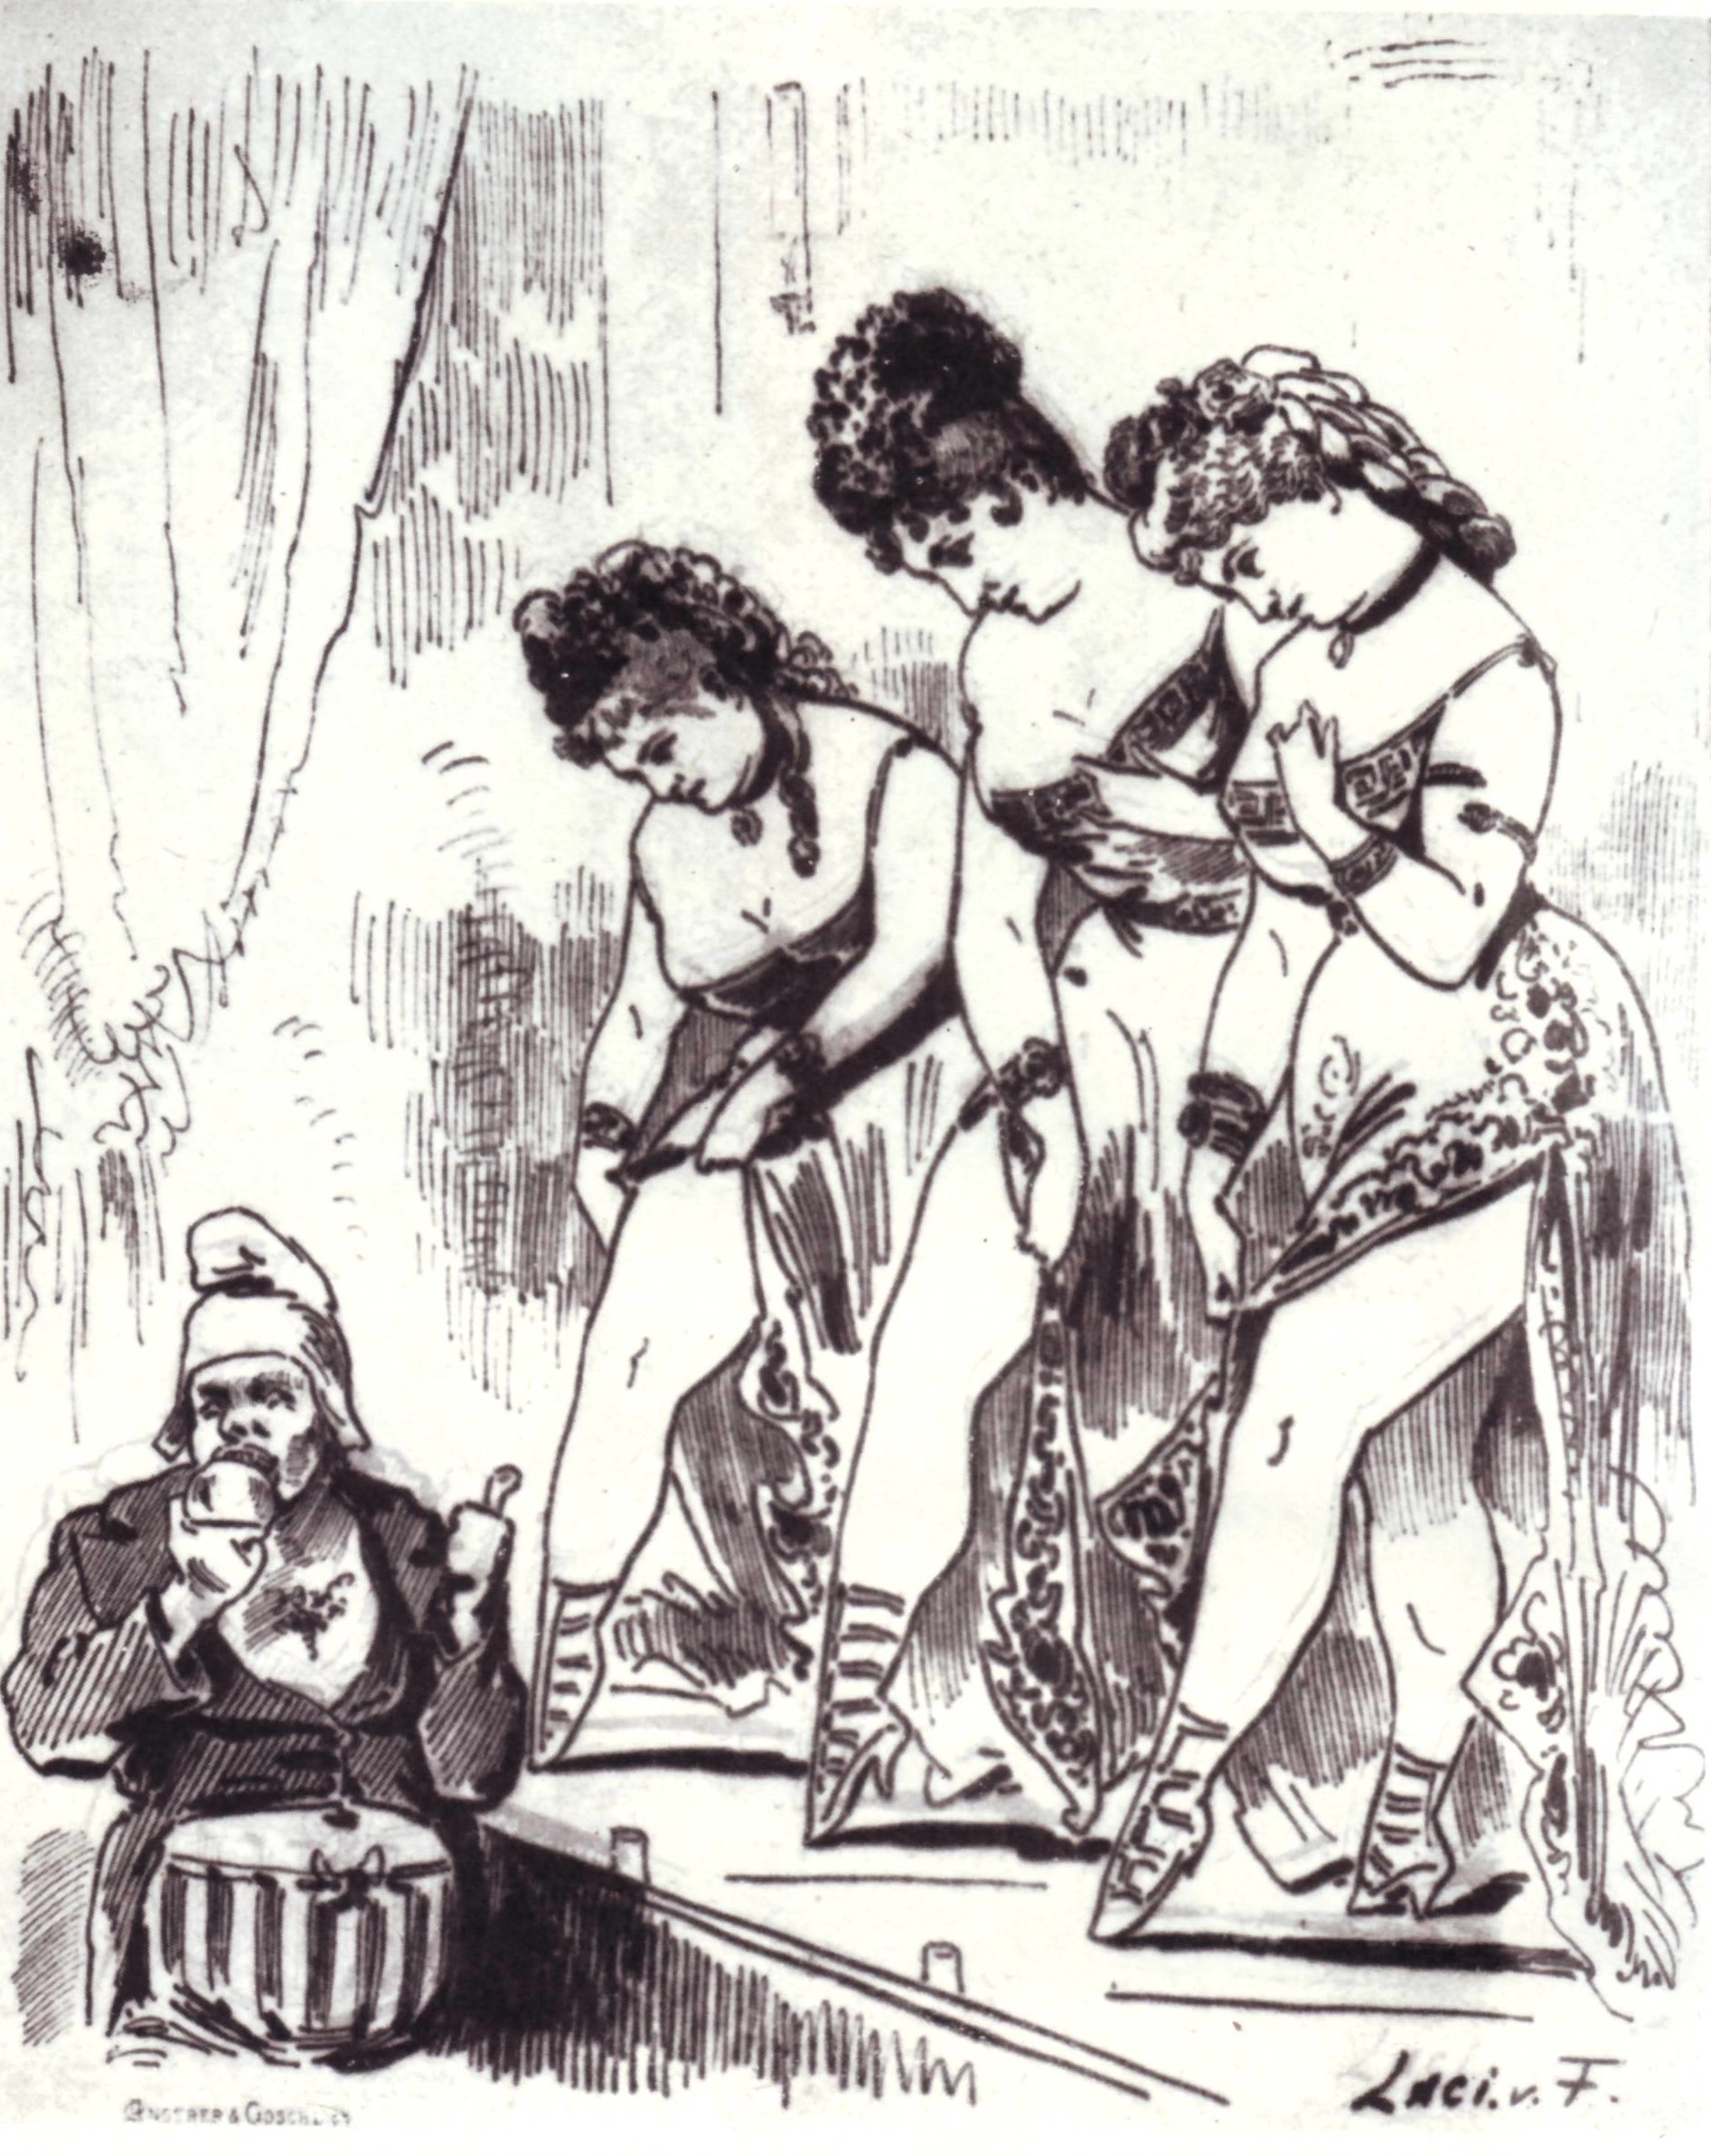 "Die drei Helenen": three famous Helenas in Vienna, in the 1860s, showing their legs to attract male audiences.